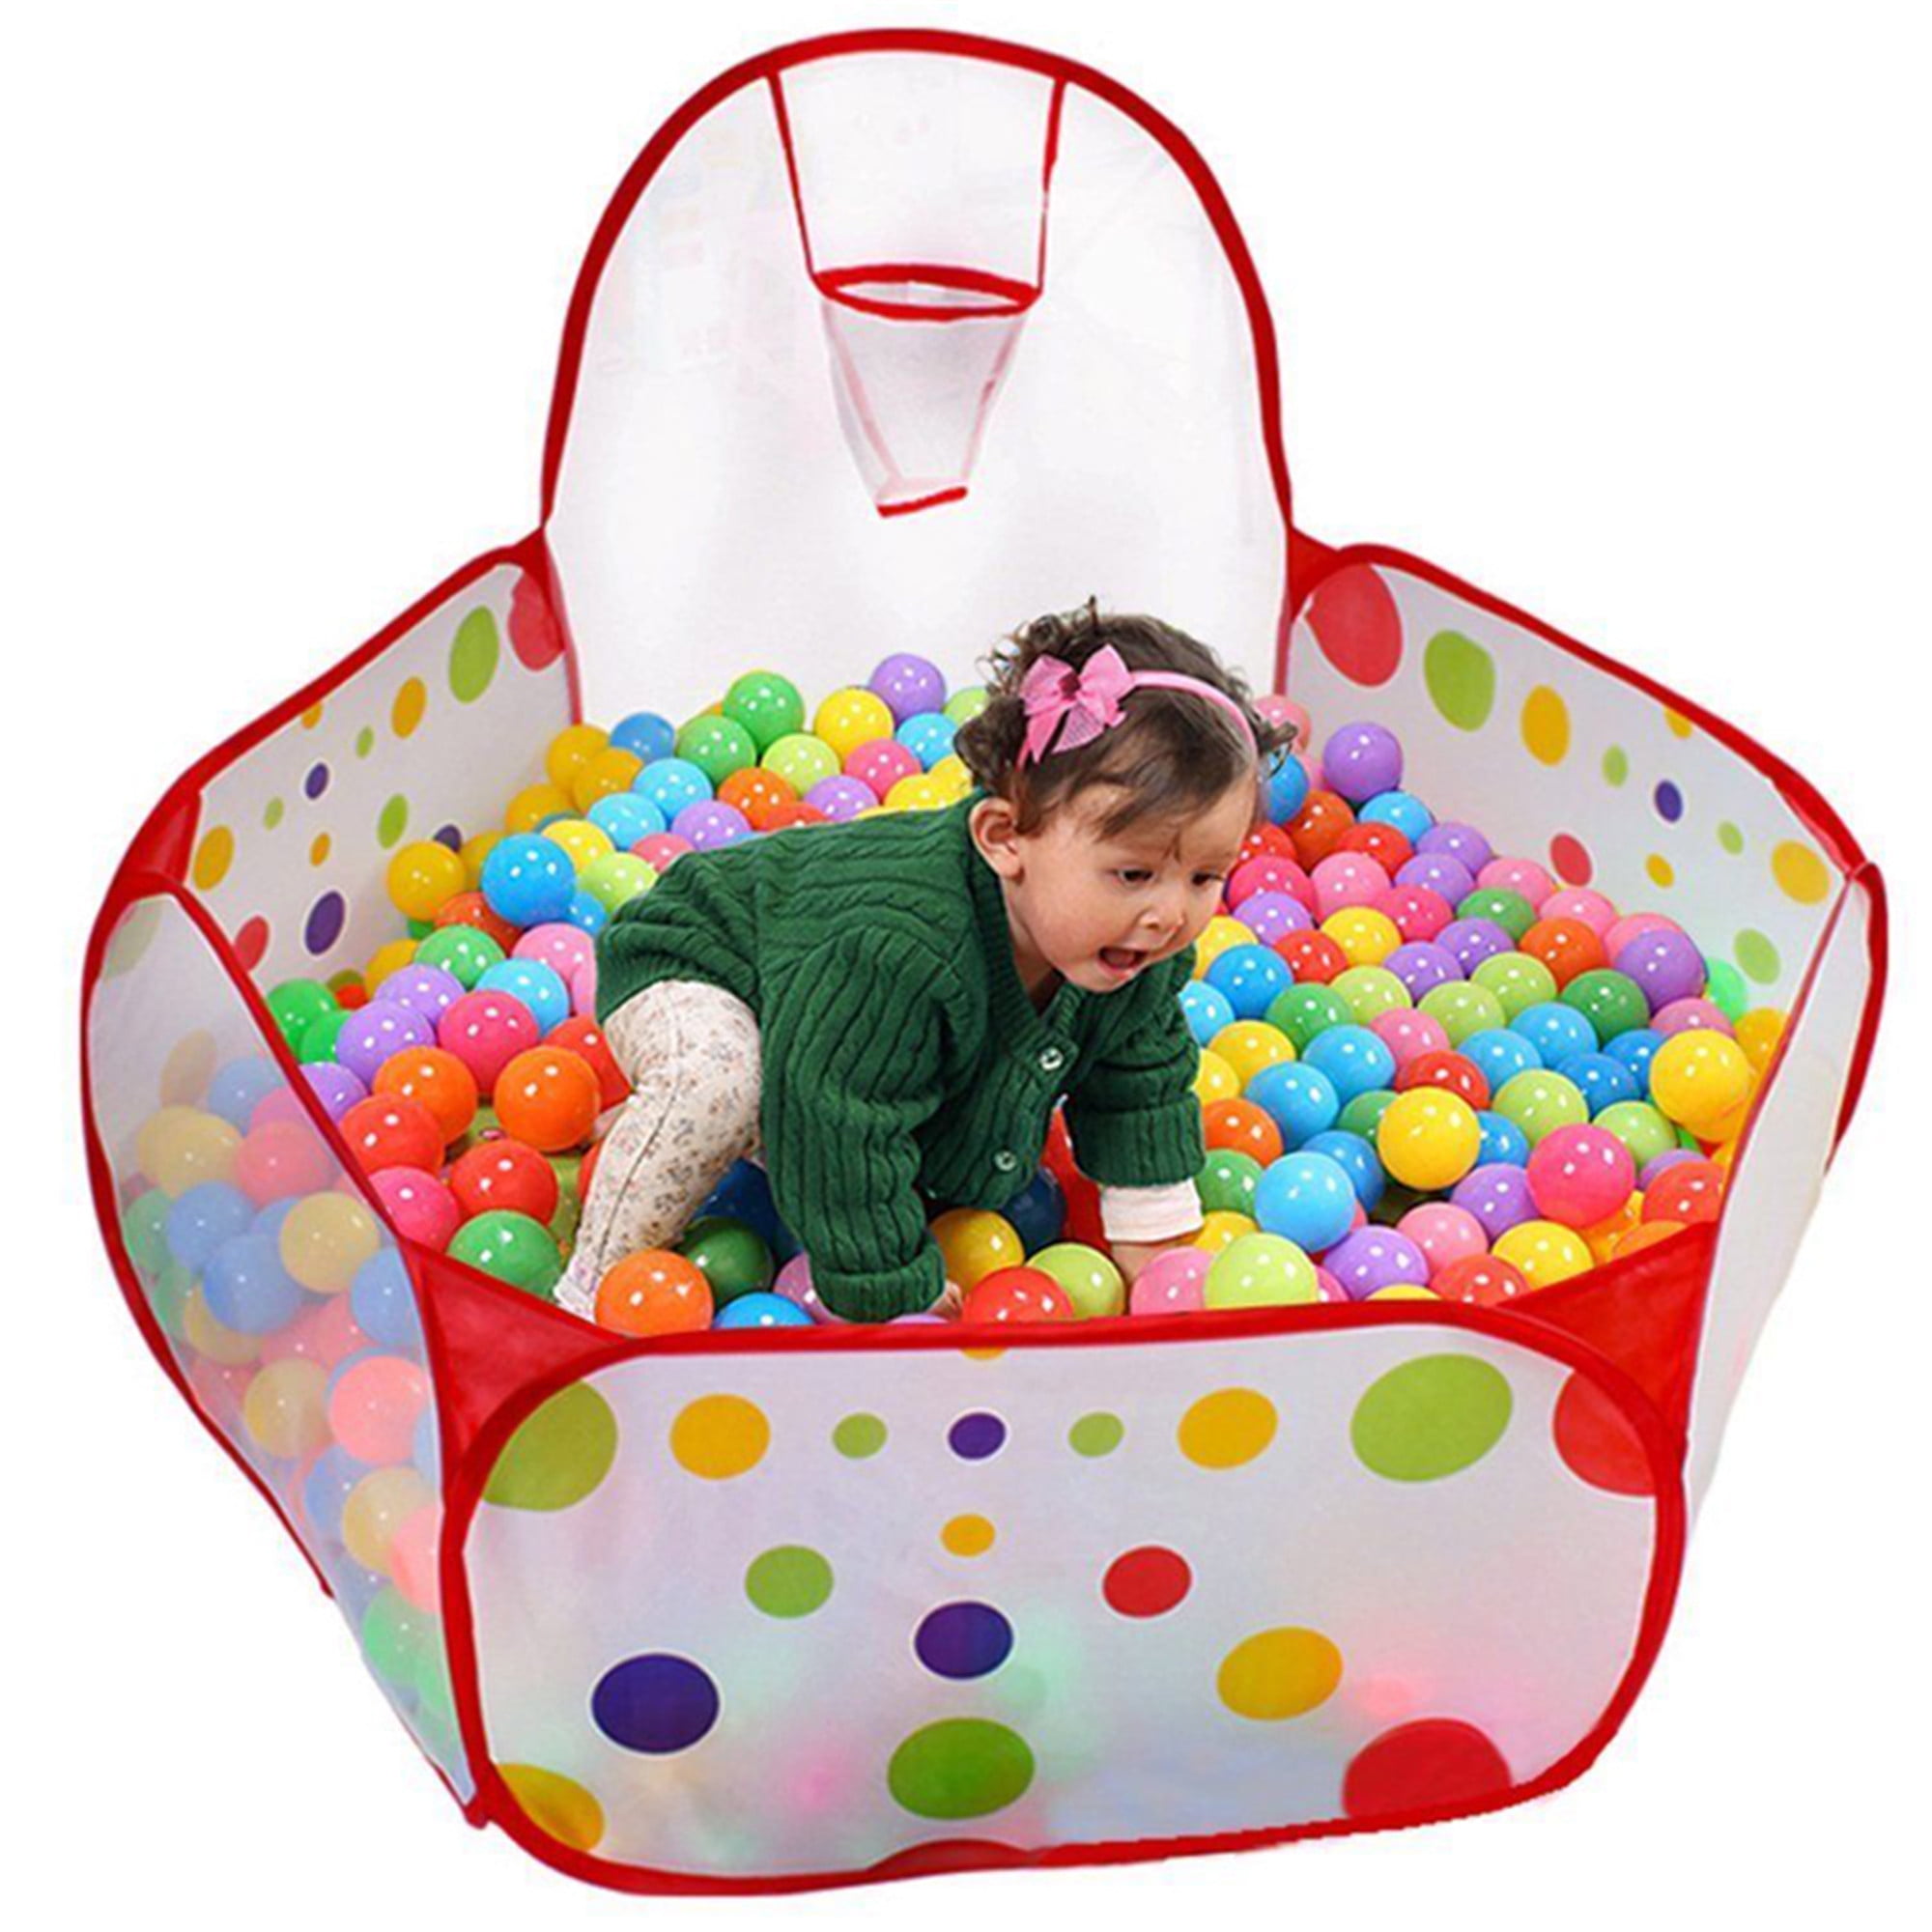 100pcs Kids Child Ball Pit Pool Play Tent for Baby Indoor Outdoor Game Toy Gift 